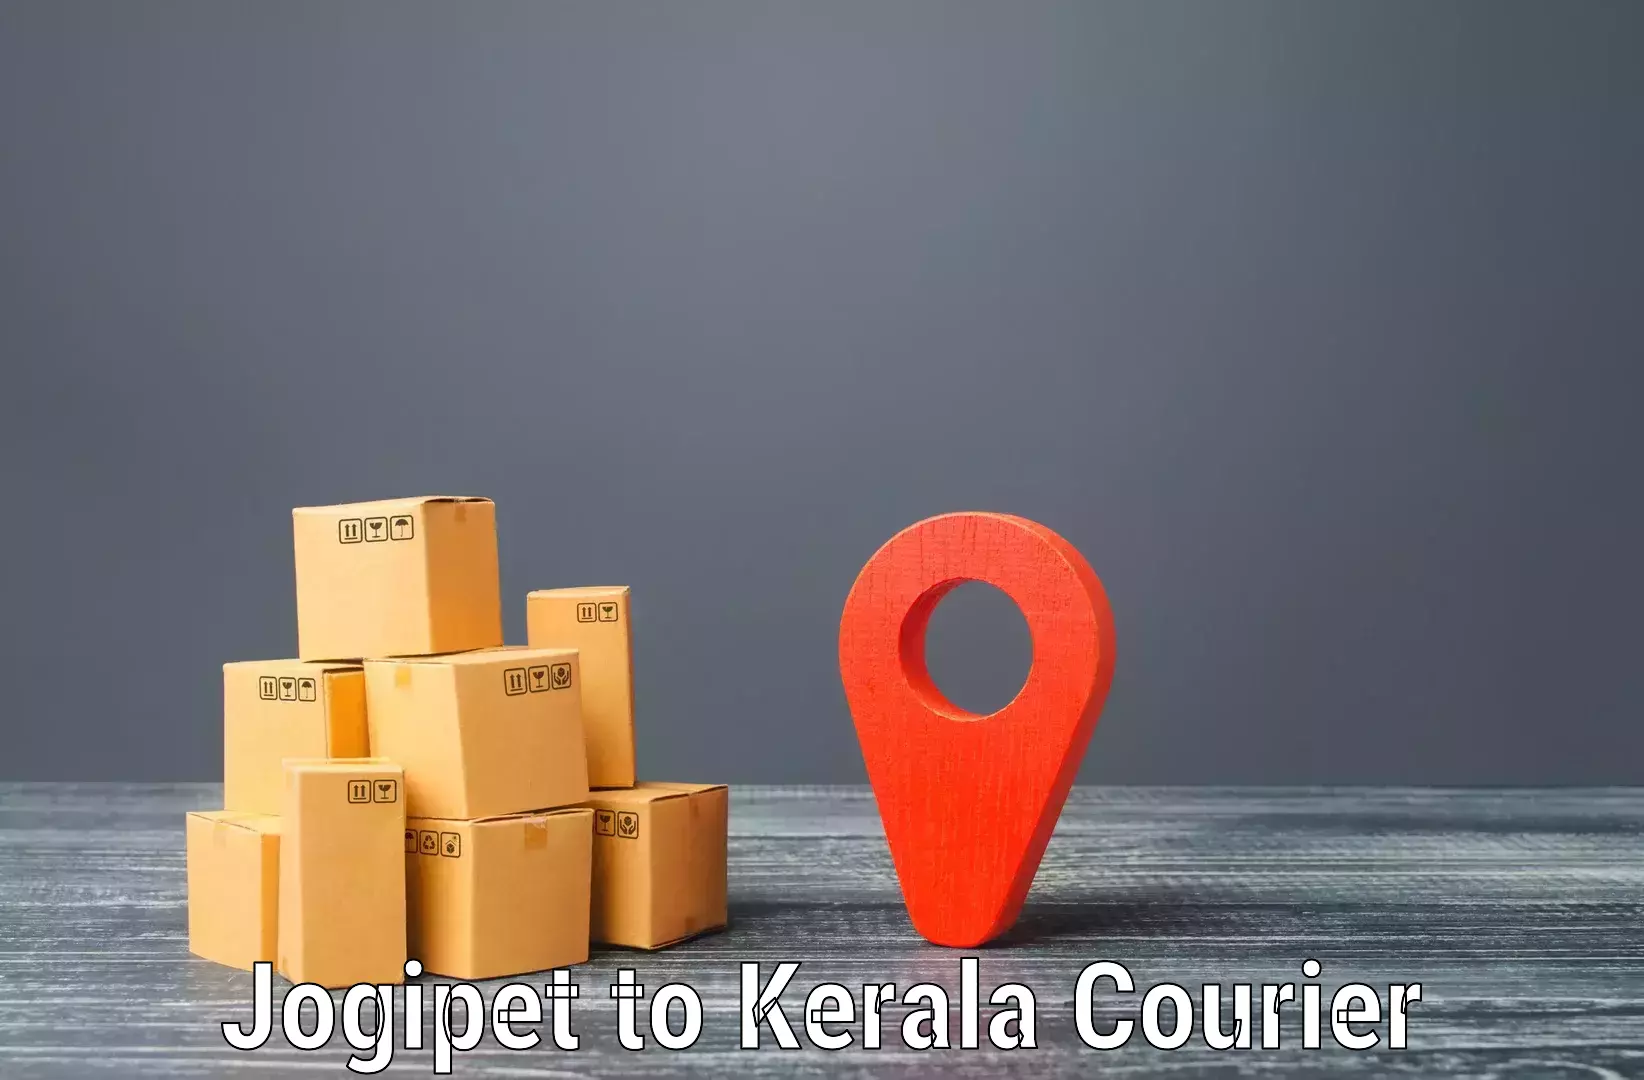 Comprehensive shipping network Jogipet to Kerala